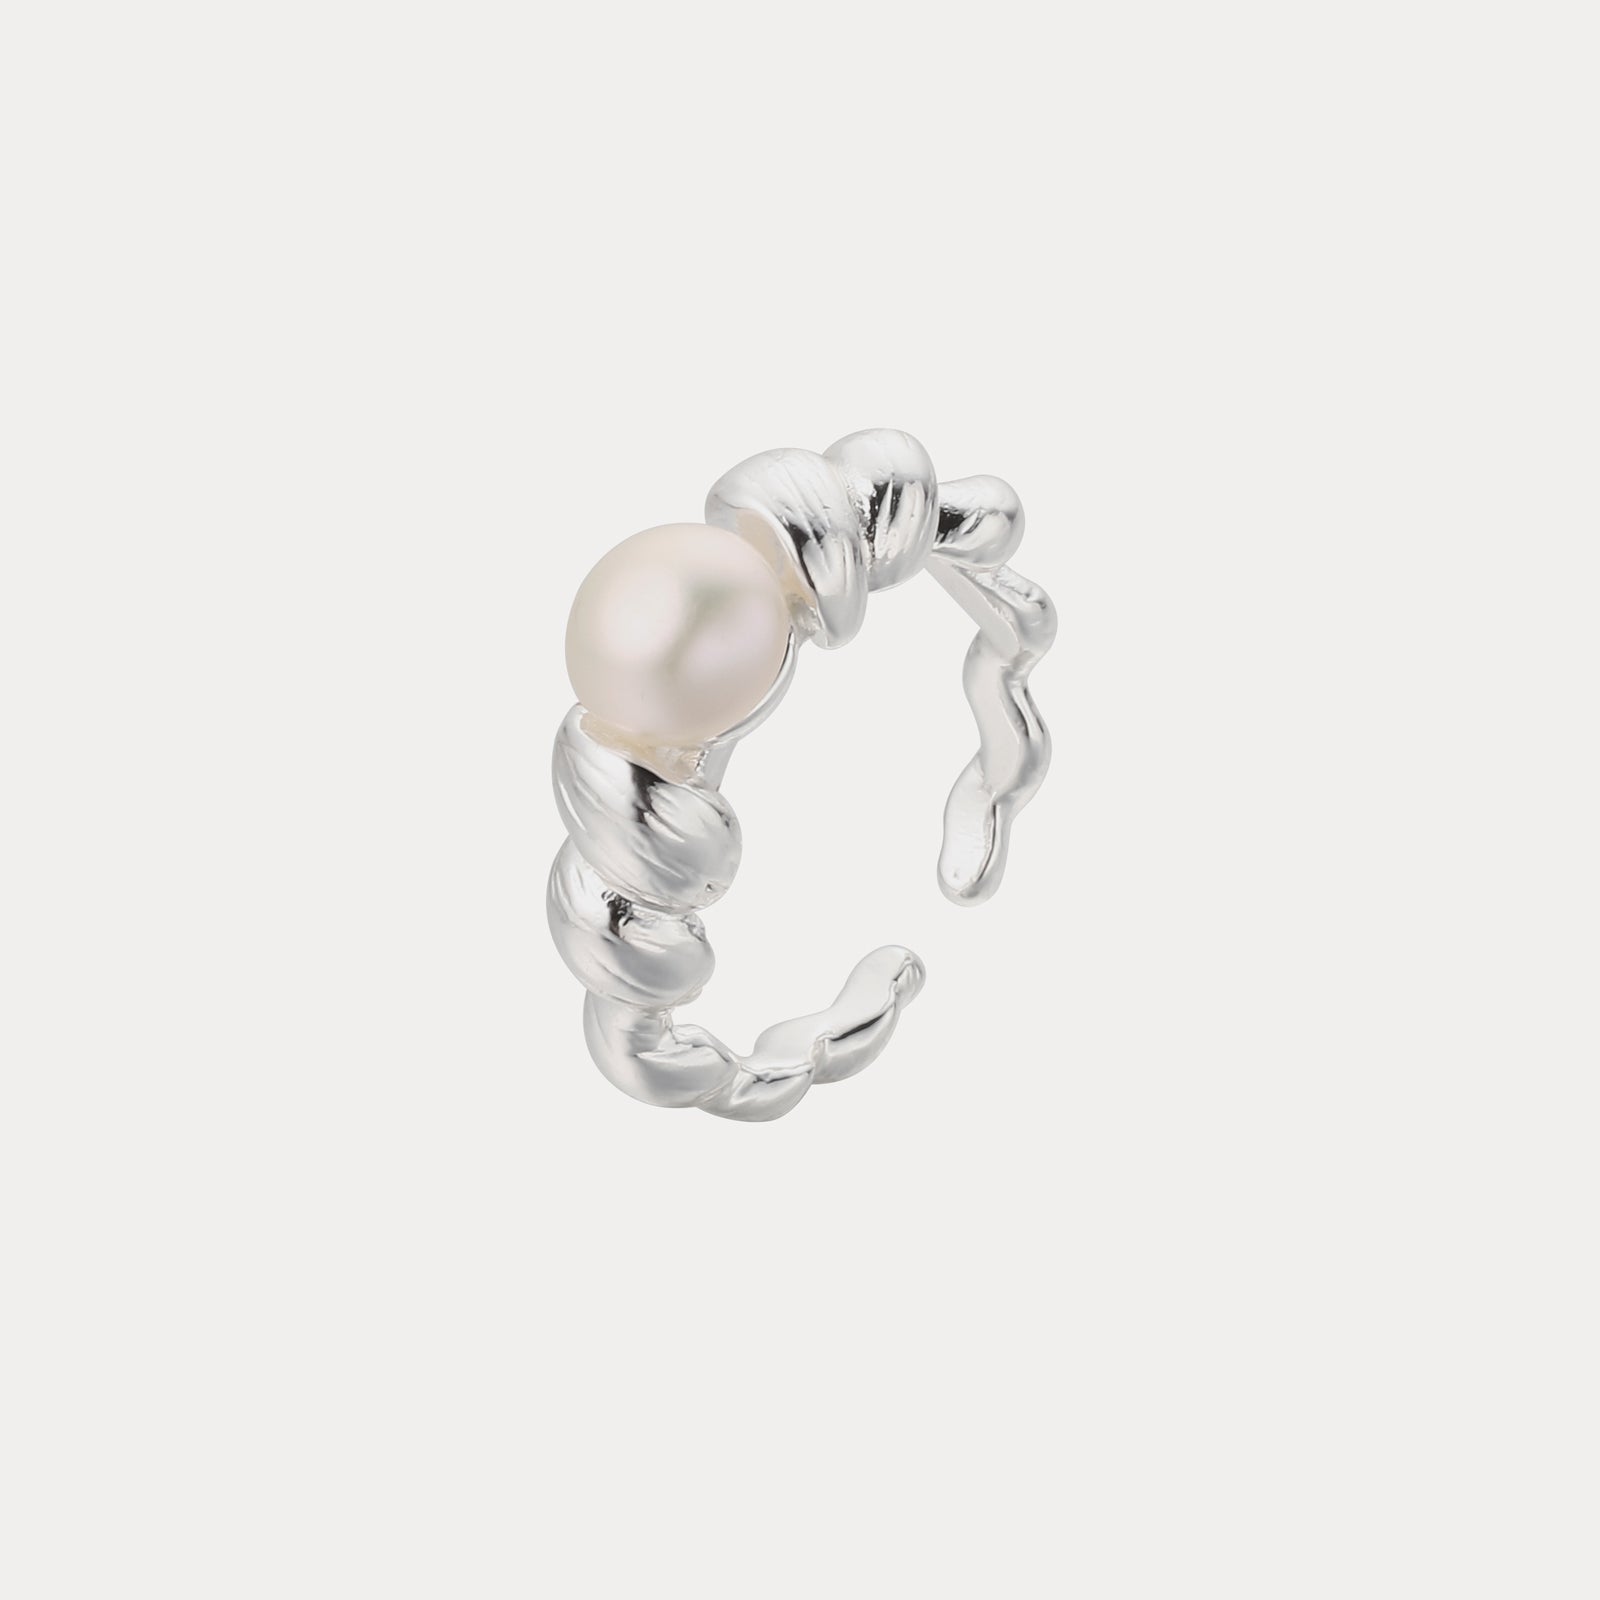 Selenichast 925 Sterling Silver Chunky Ring